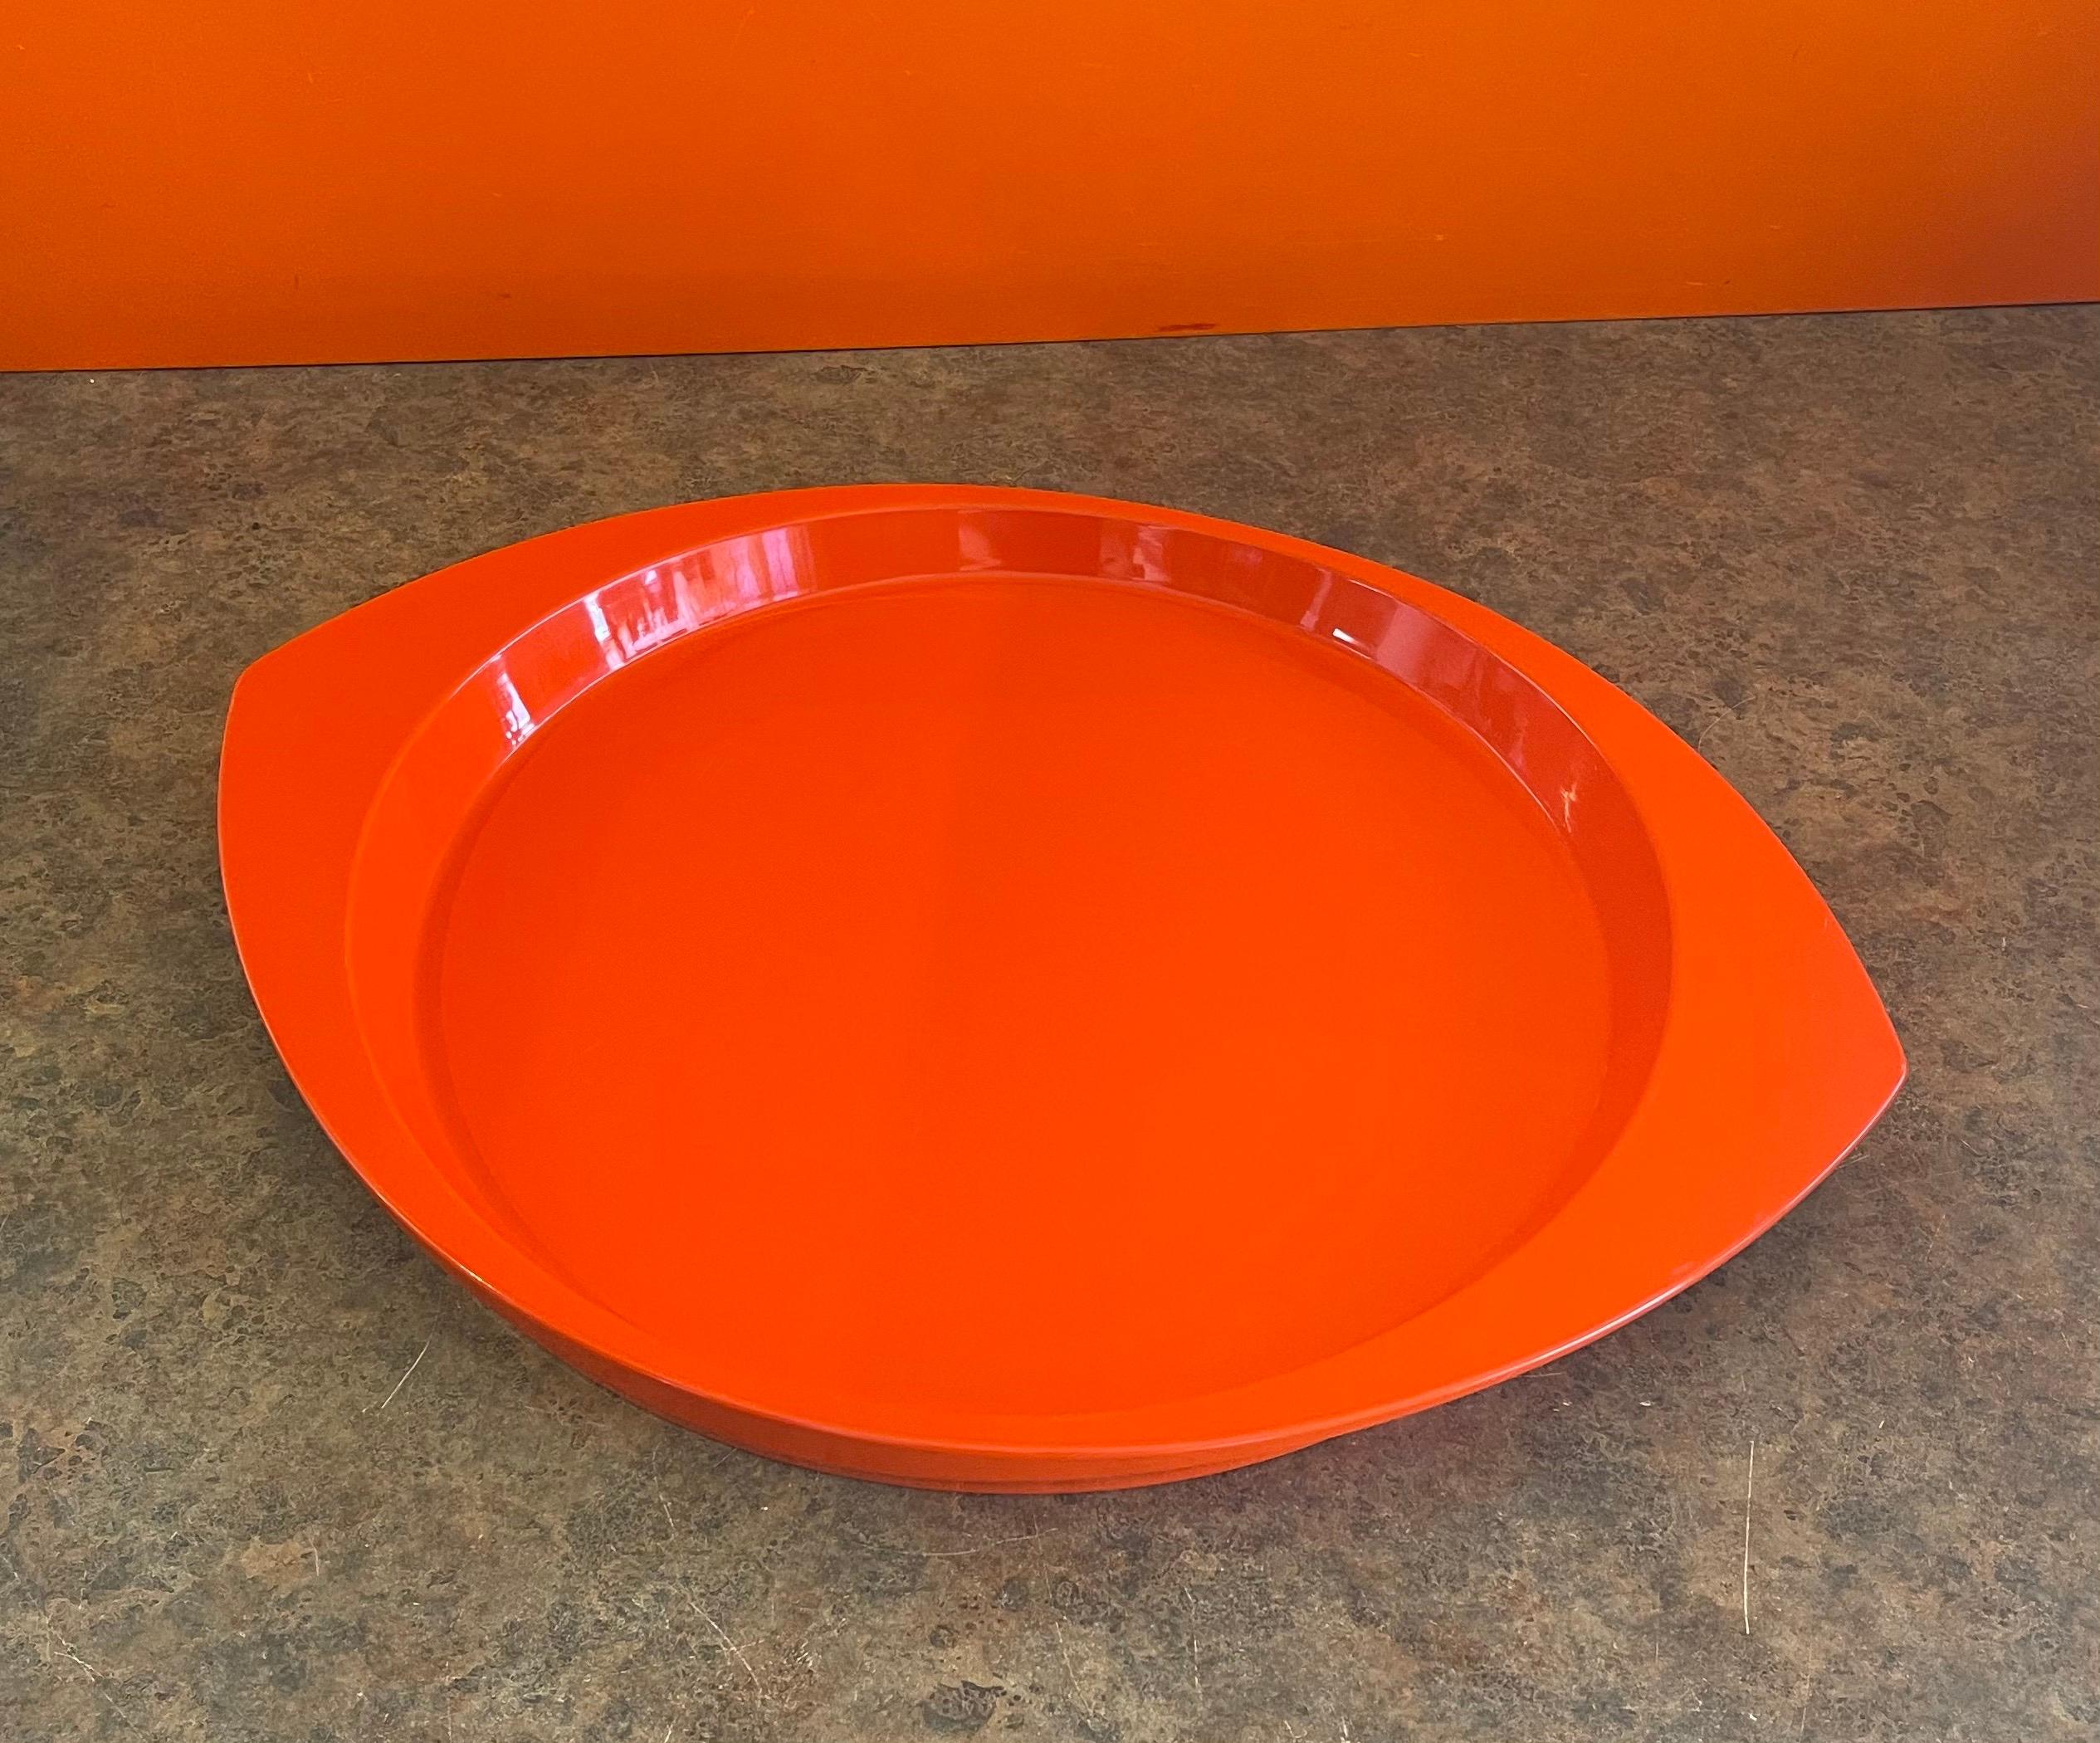 Scandinavian Modern Large Oval Orange Lacquer Tray by Jens Quistgaard for Dansk, Early Production